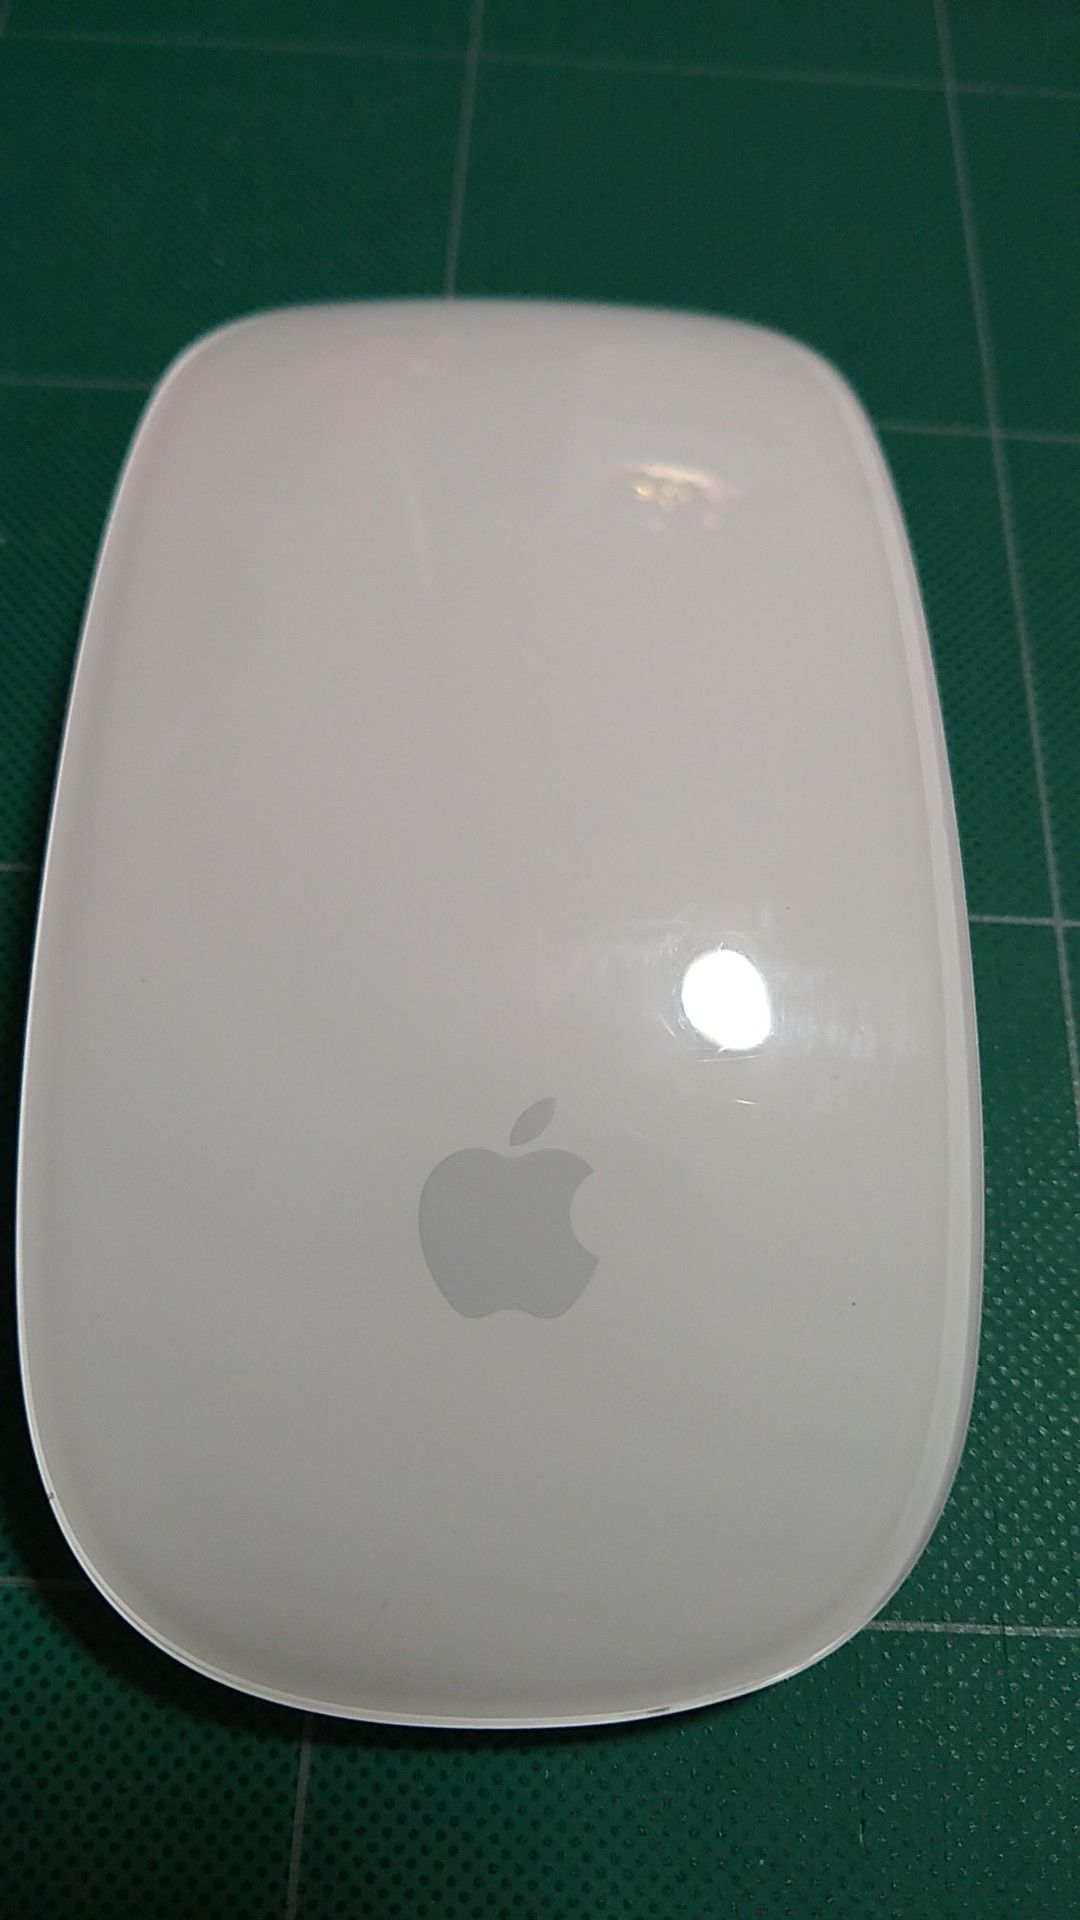 Apple Magic Mouse Wireless Multi-Touch Mouse